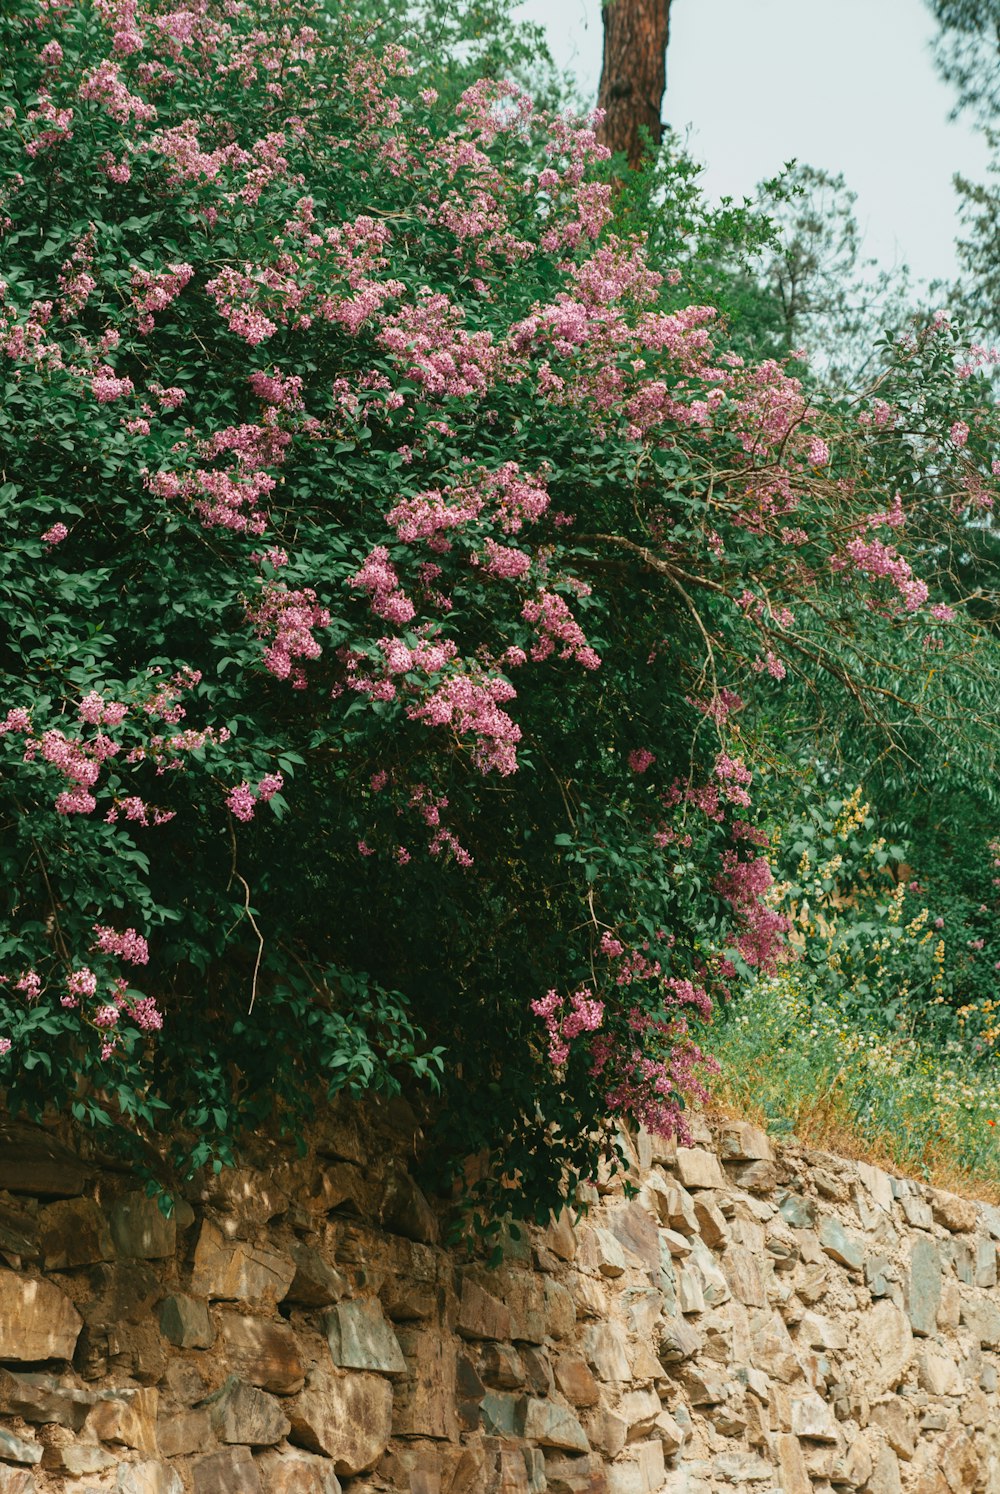 a stone wall with pink flowers growing on it